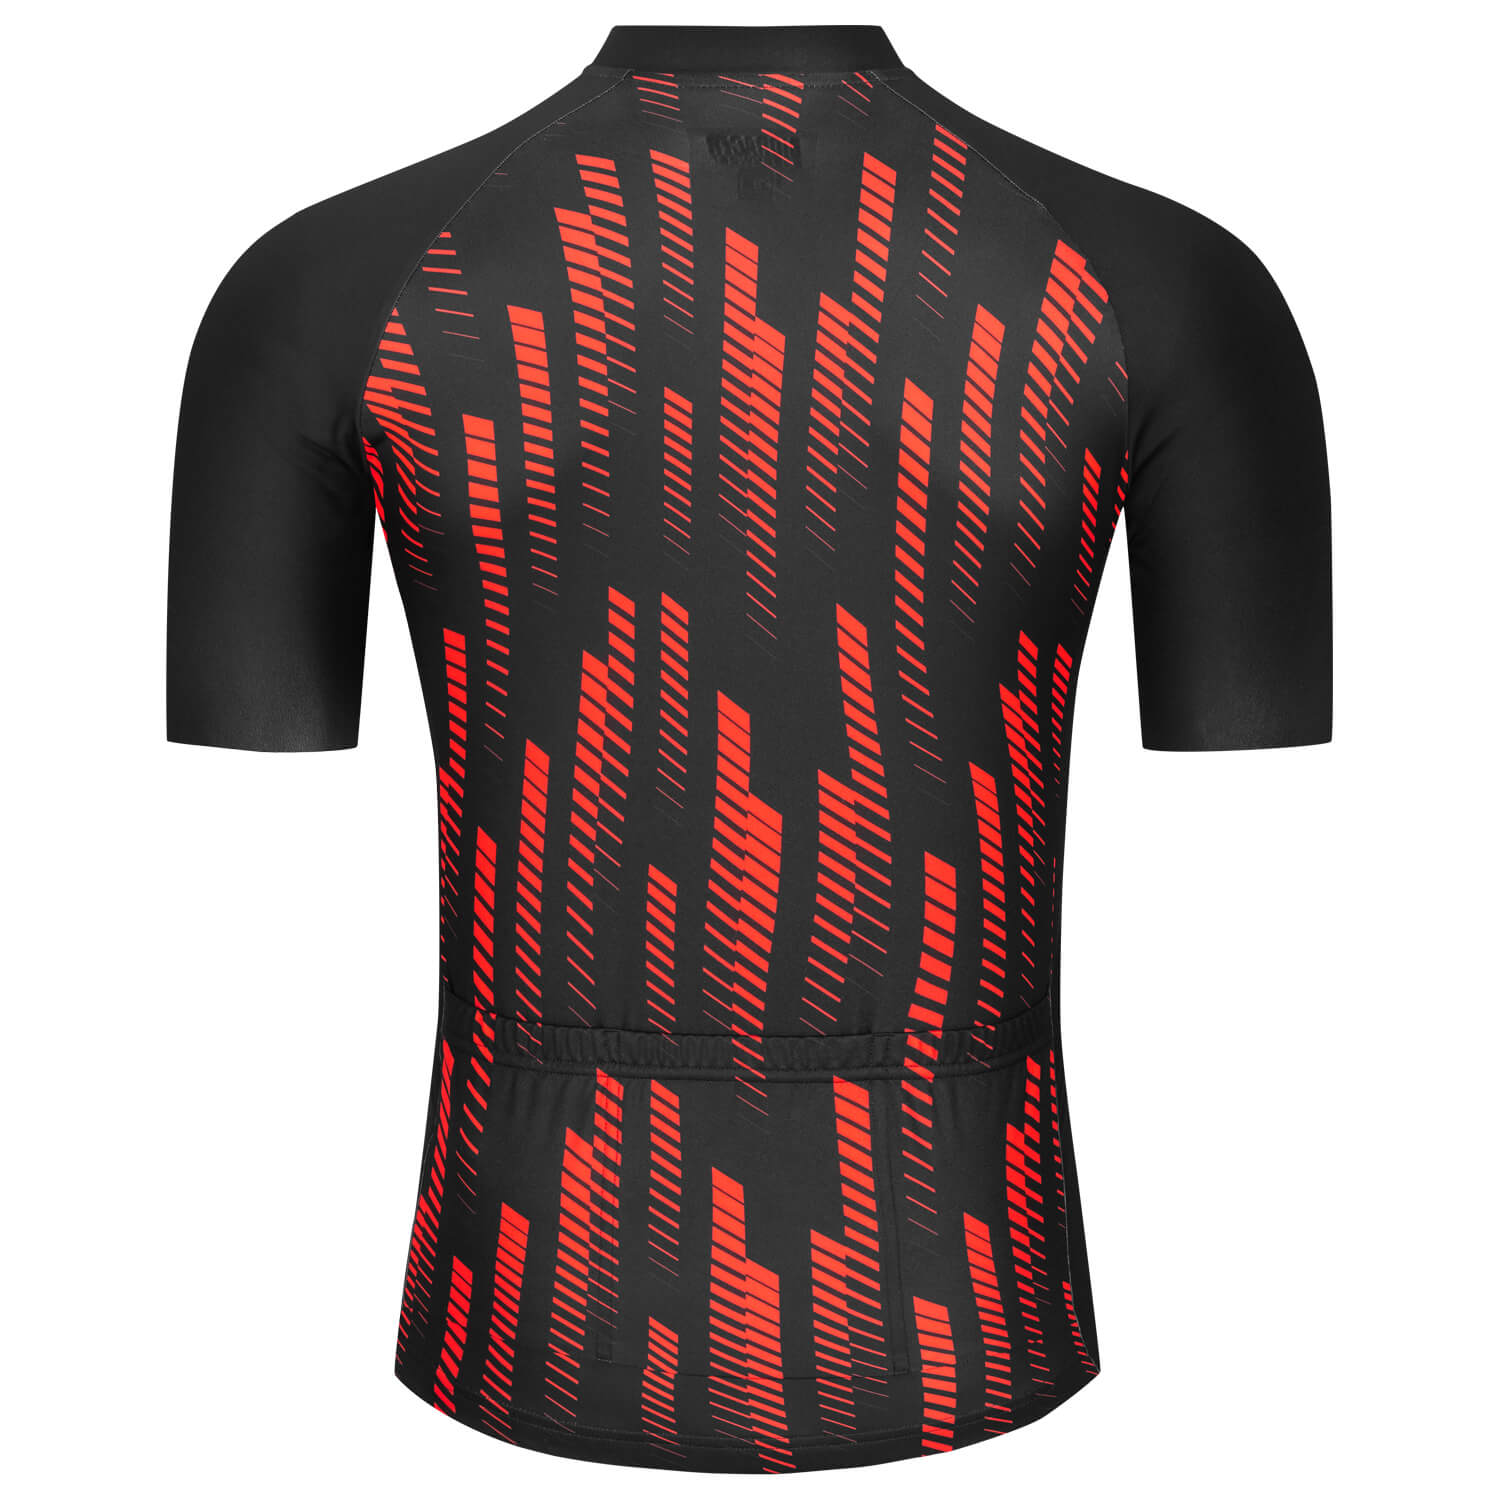 Bild 2: Cycling Jersey Red Style 